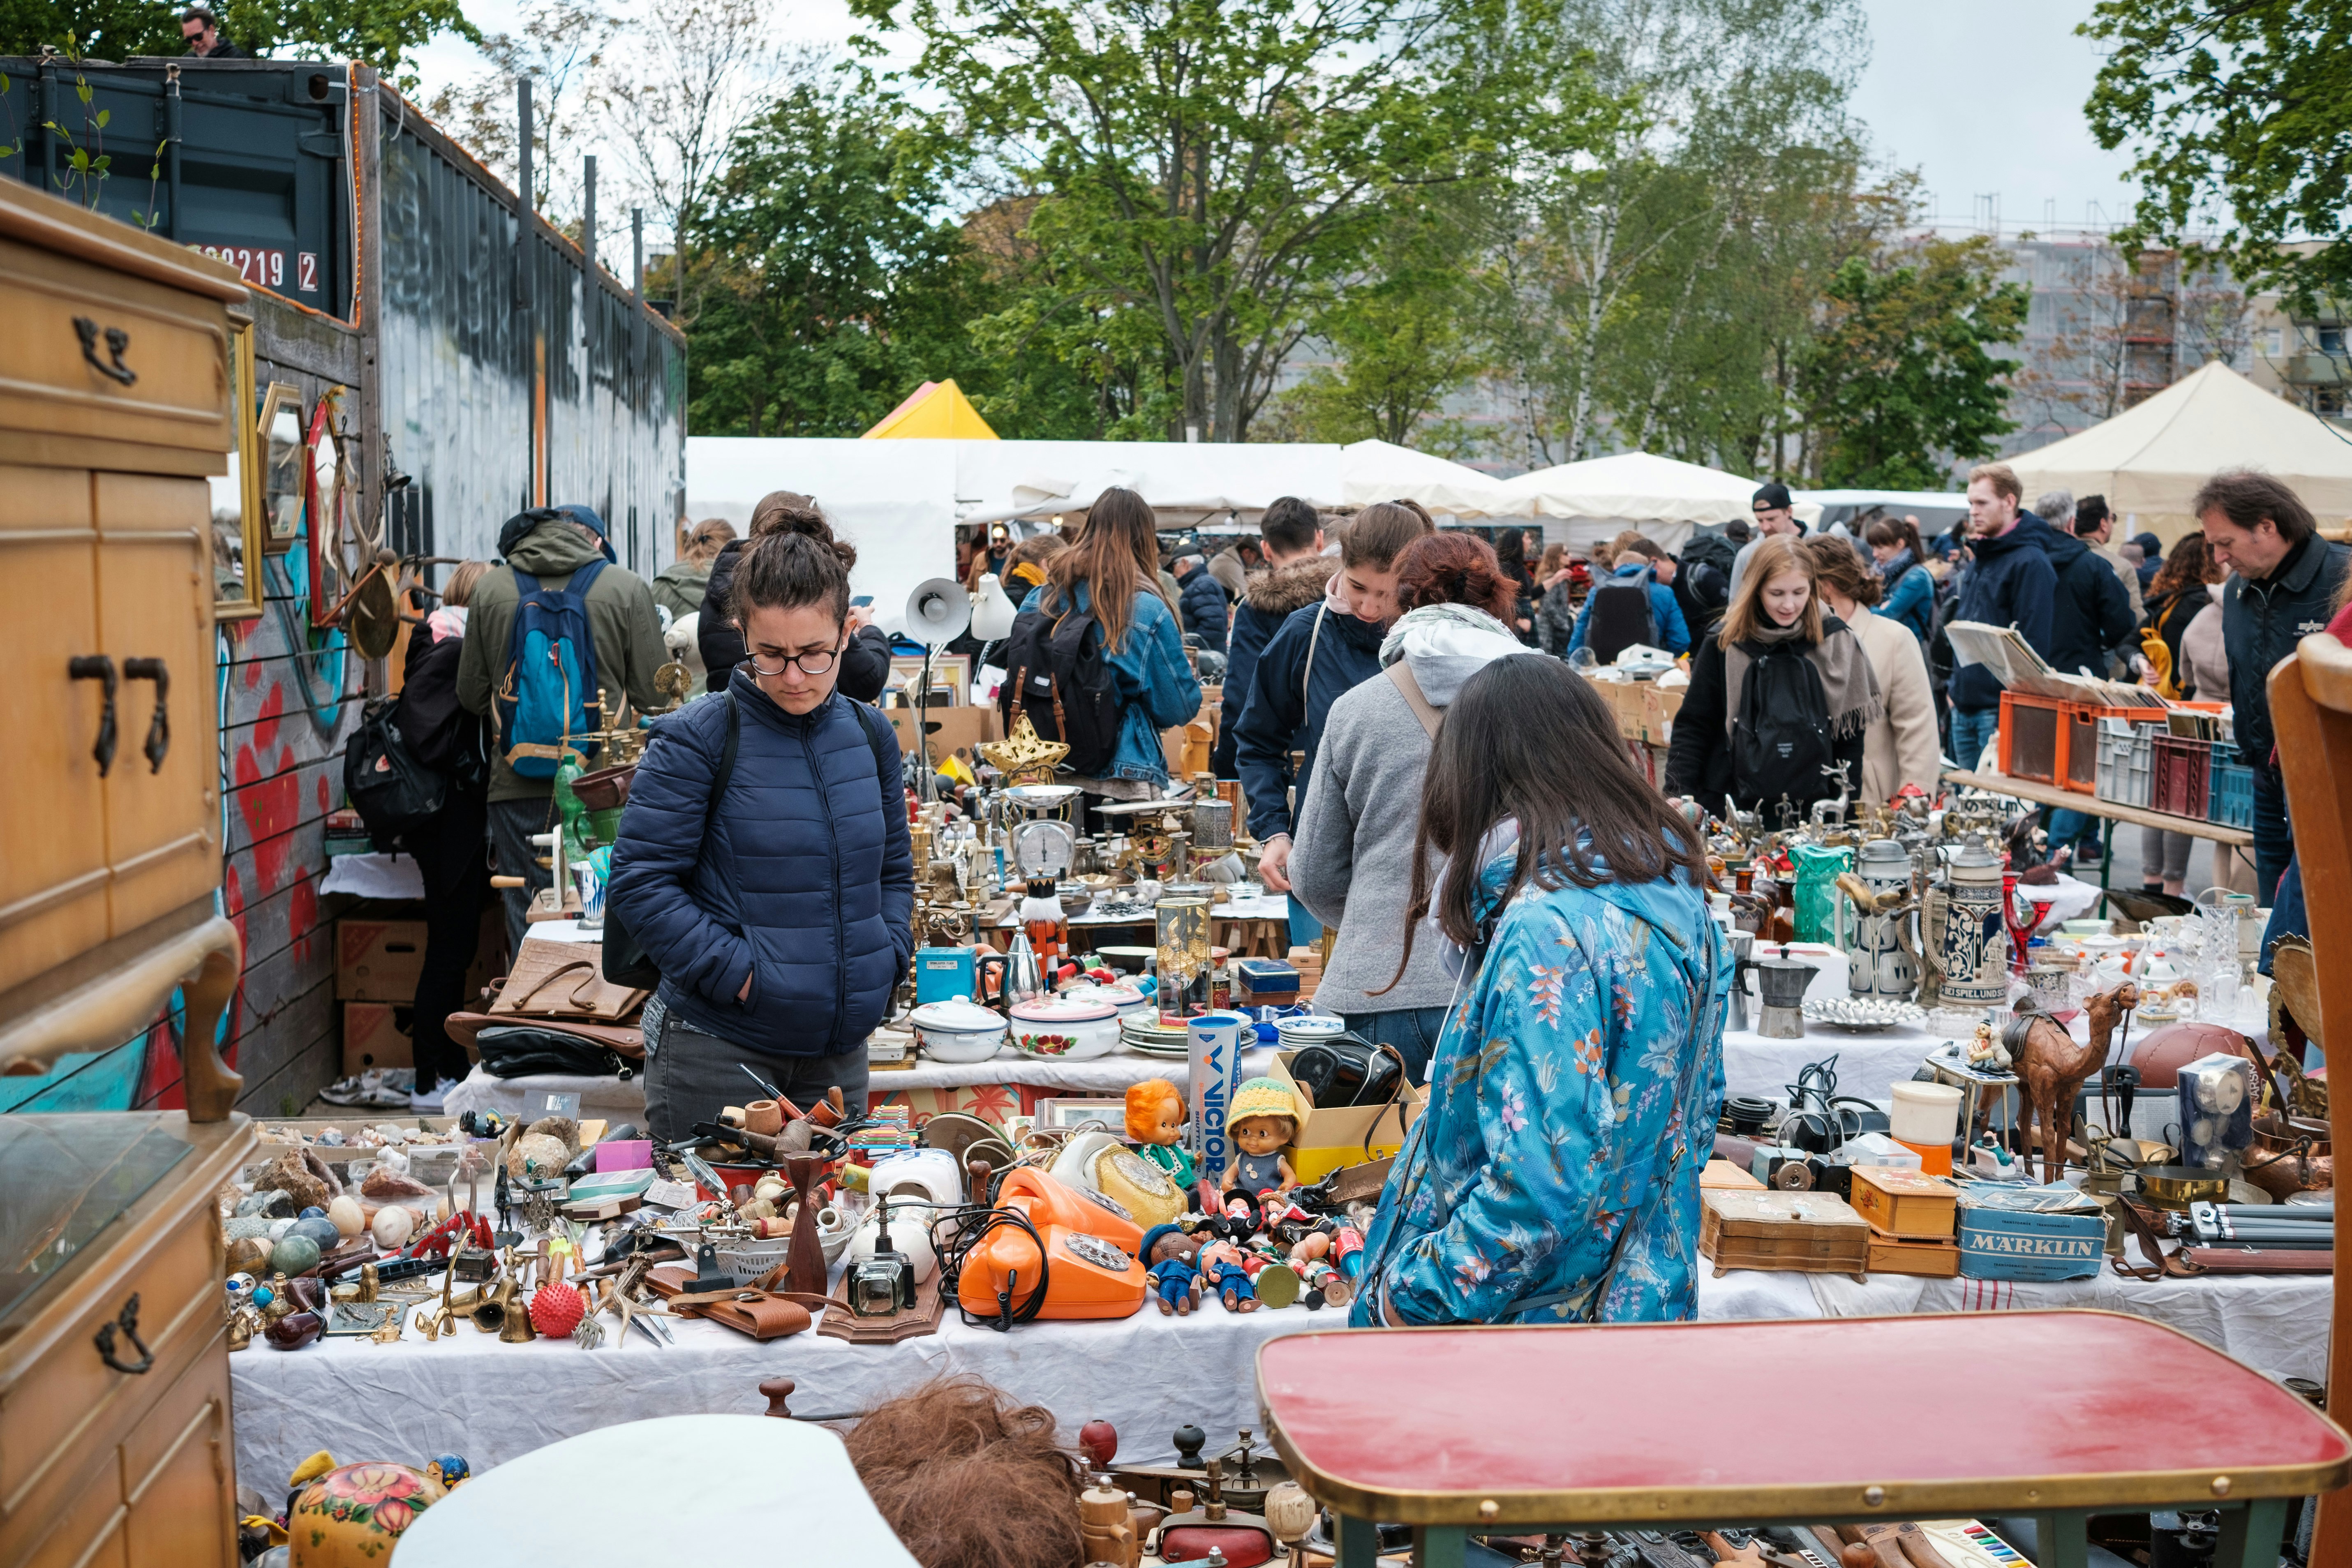 Many people are perusing the outdoor tables laden with vintage items and bric-a-brac at the flea market in Berlin's Mauerpark.